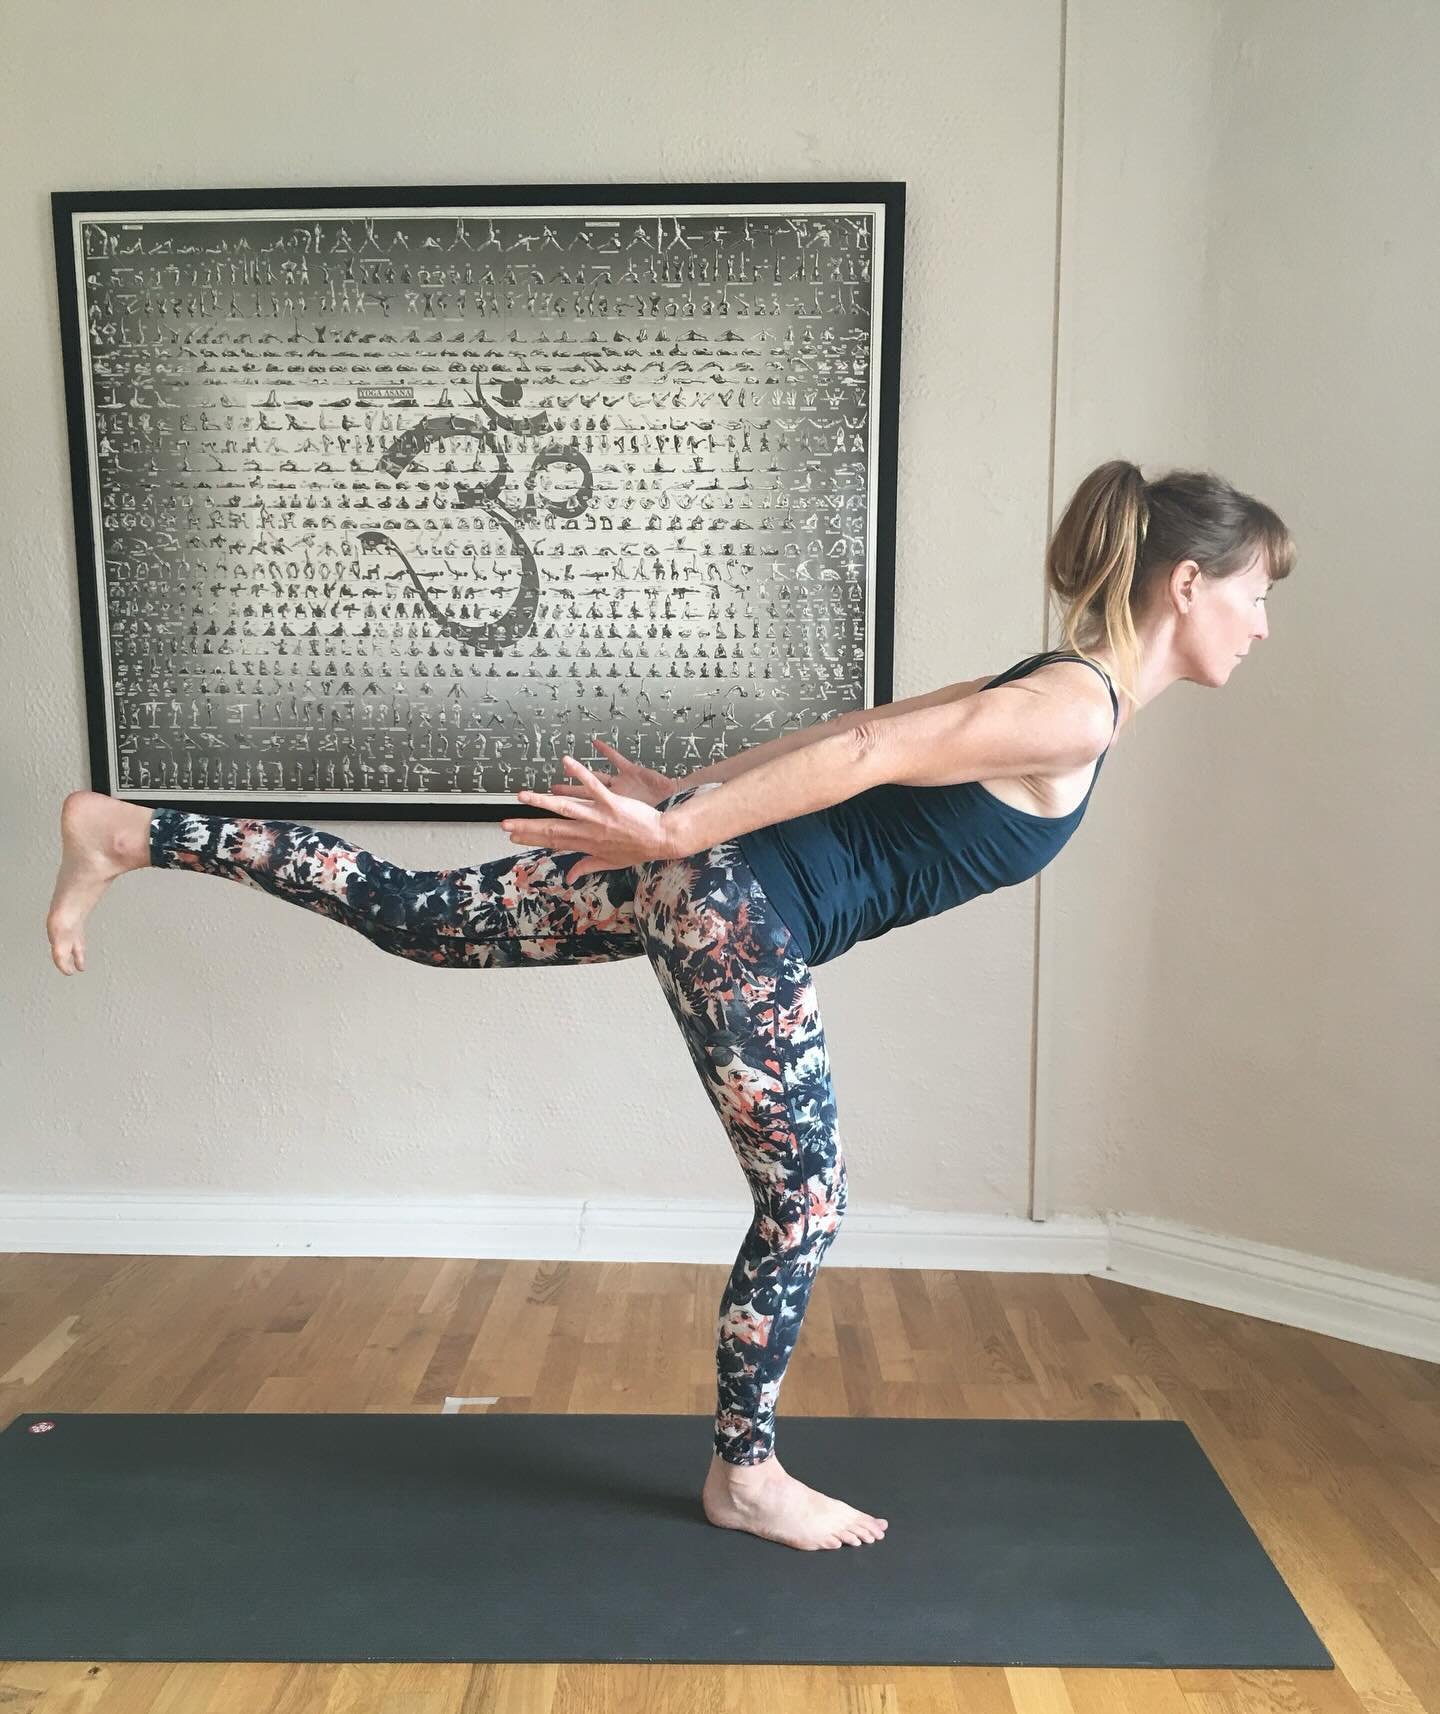 Eight week early morning yoga series starts May 7th at 7am - 60 mins

Awaken your body and set a positive tone for your day. Whether you&rsquo;re fitting in a session before work or you&rsquo;re naturally an early bird, these vinyasa-based classes ar